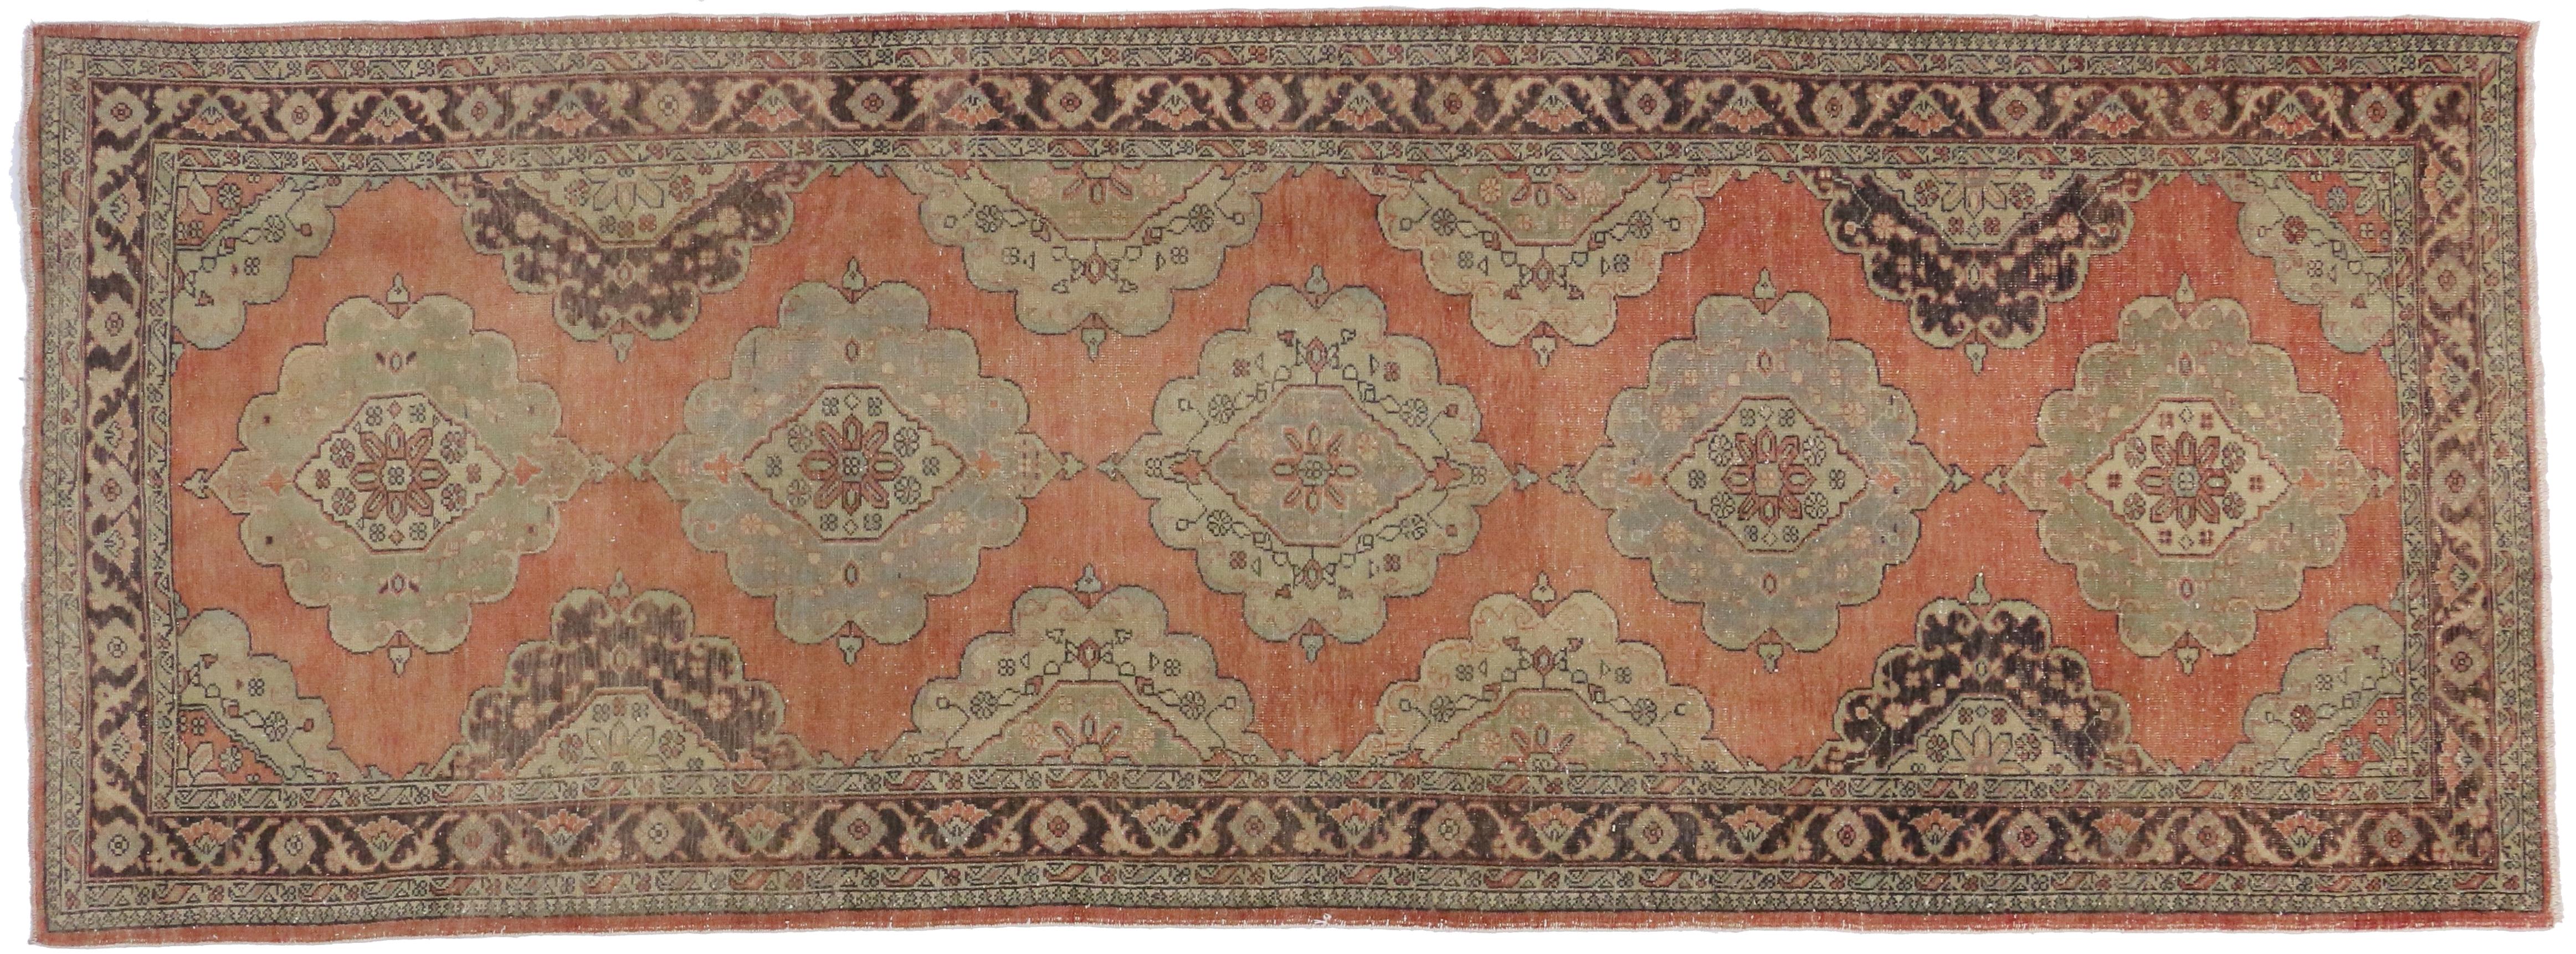 51142-51149 Pair of Vintage Turkish Oushak Gallery Rugs, Matching Hallway Runners. This pair of matching vintage Turkish Oushak gallery rugs each feature five lobed floral medallions spread across abrashed terracotta field. Spandrels and